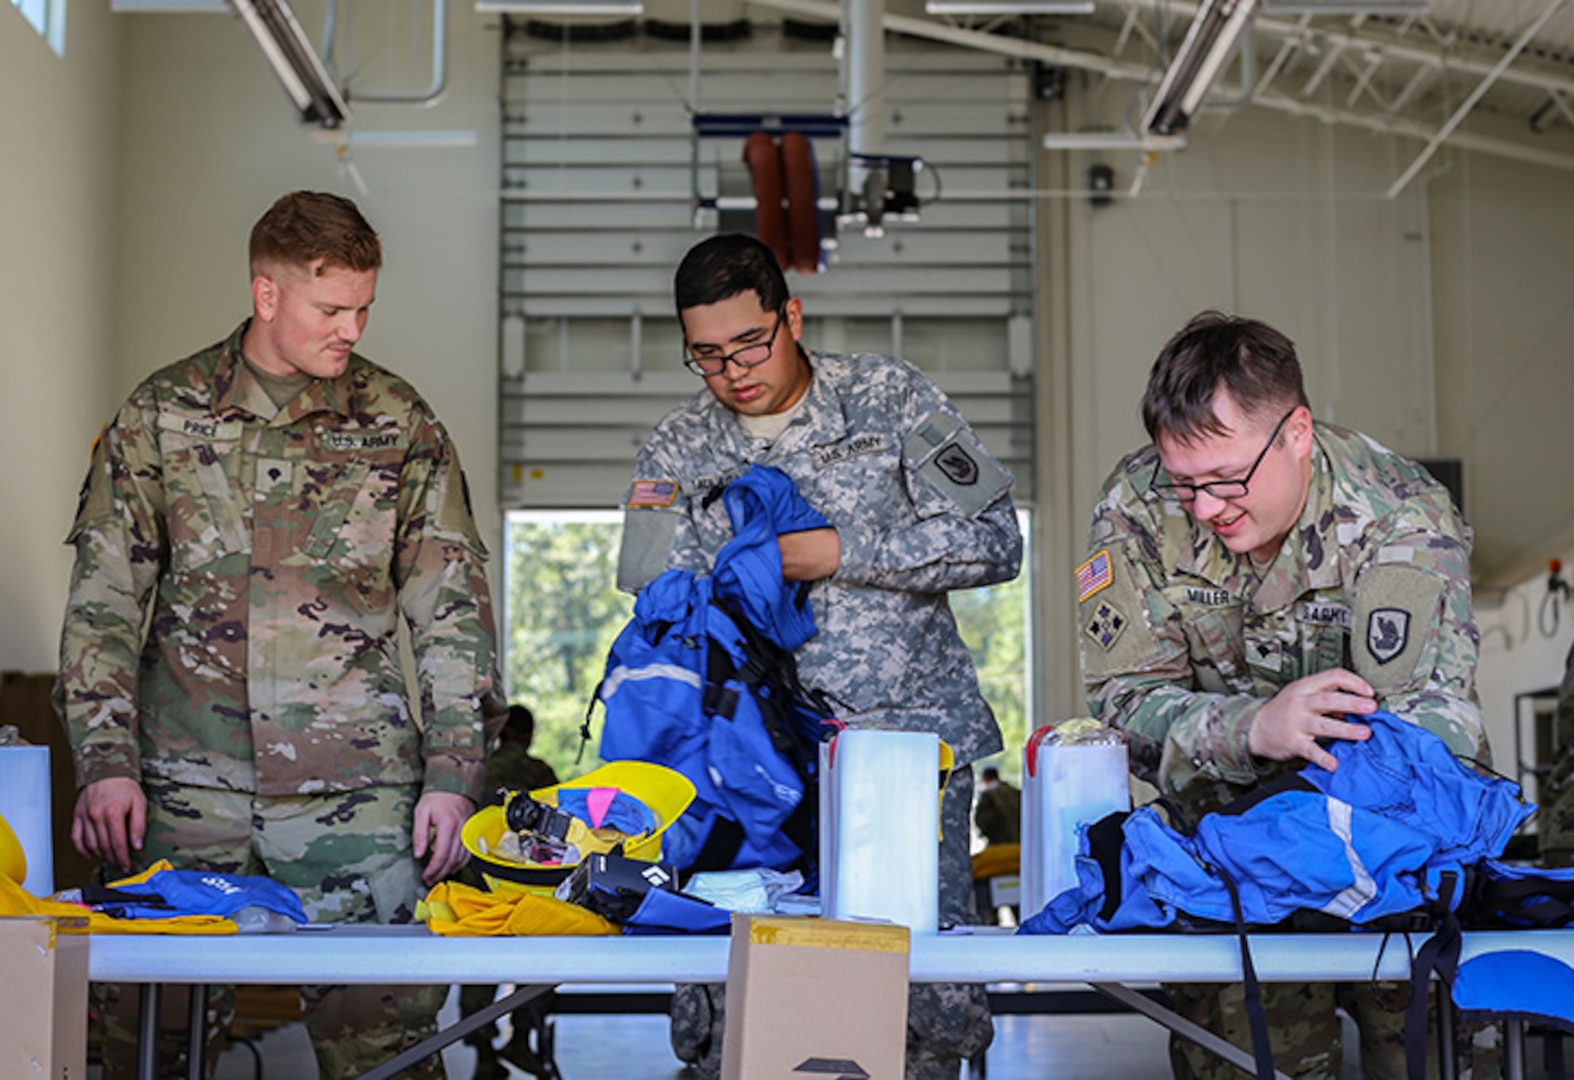 Spec. Derek Price, Pfc. Joshua Taulaga and Spec. Austin Miller with the 176th Engineer Company inventory the new equipment they received prior to going to help fight wildfires impacting Eastern Washington, Aug. 1, 2018, at Camp Murray, Washington.